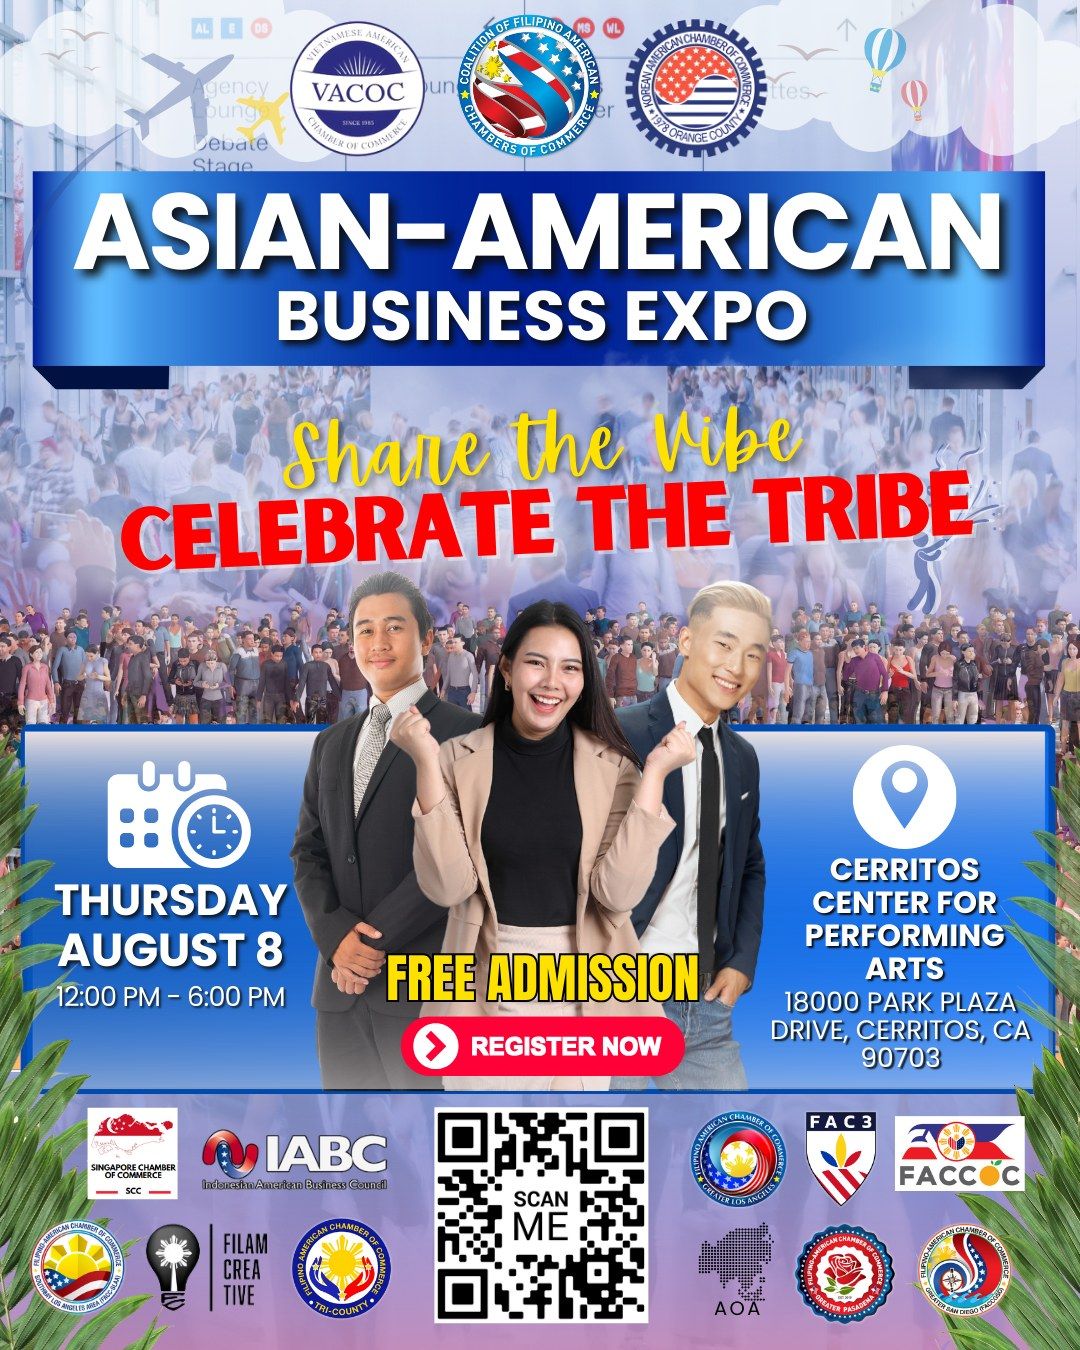 Asian-American Business Expo: Share the Vibe, Celebrate the Tribe